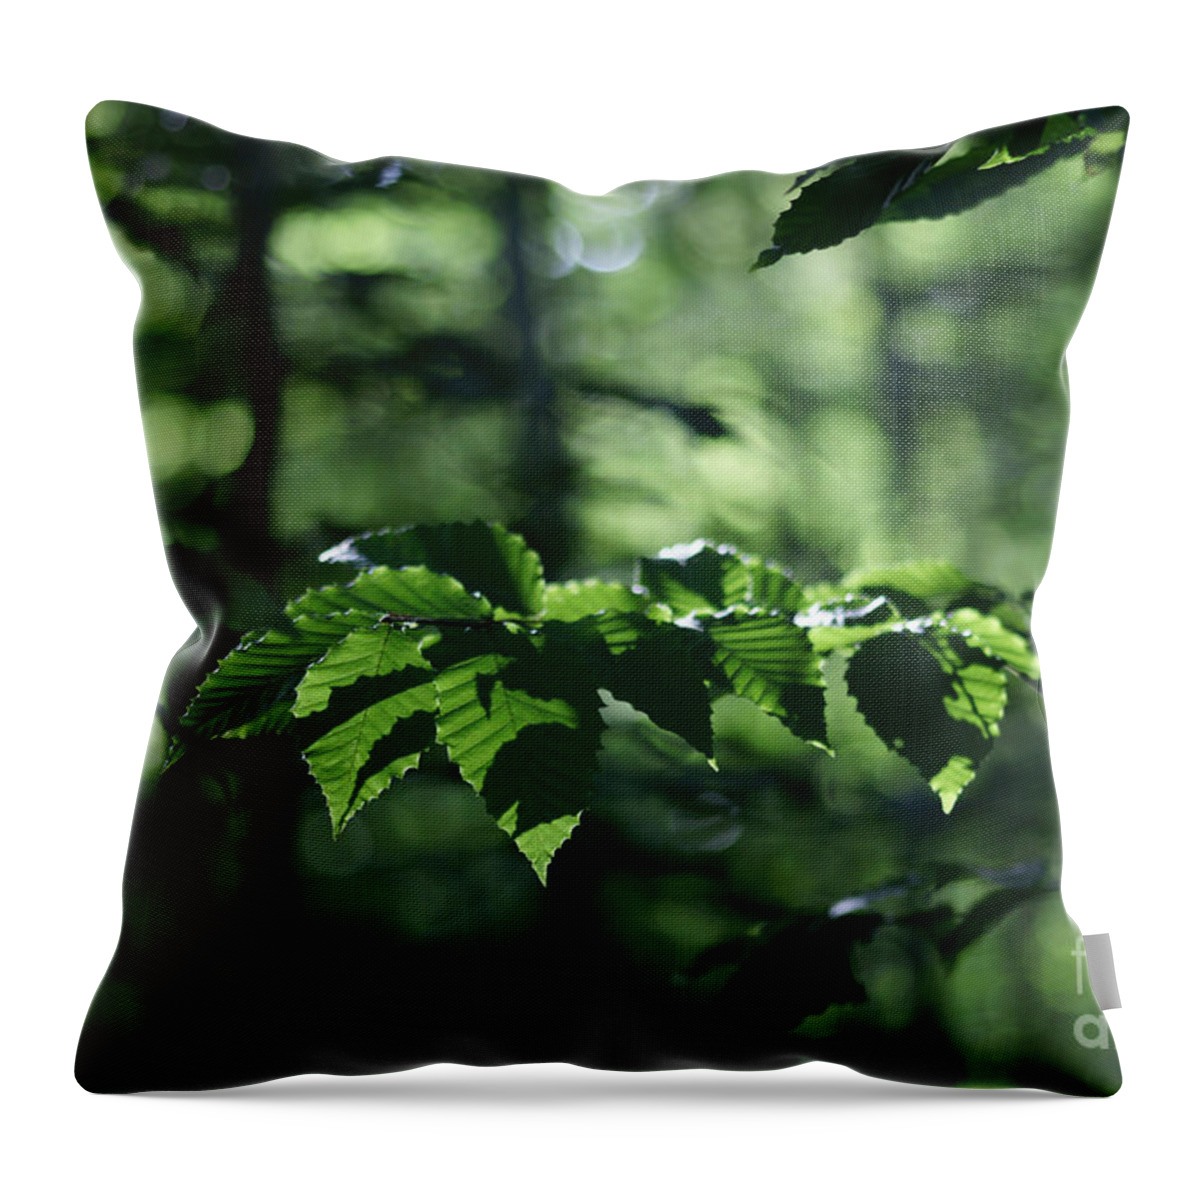 Woods Throw Pillow featuring the photograph Never Far From My Thoughts by Linda Shafer